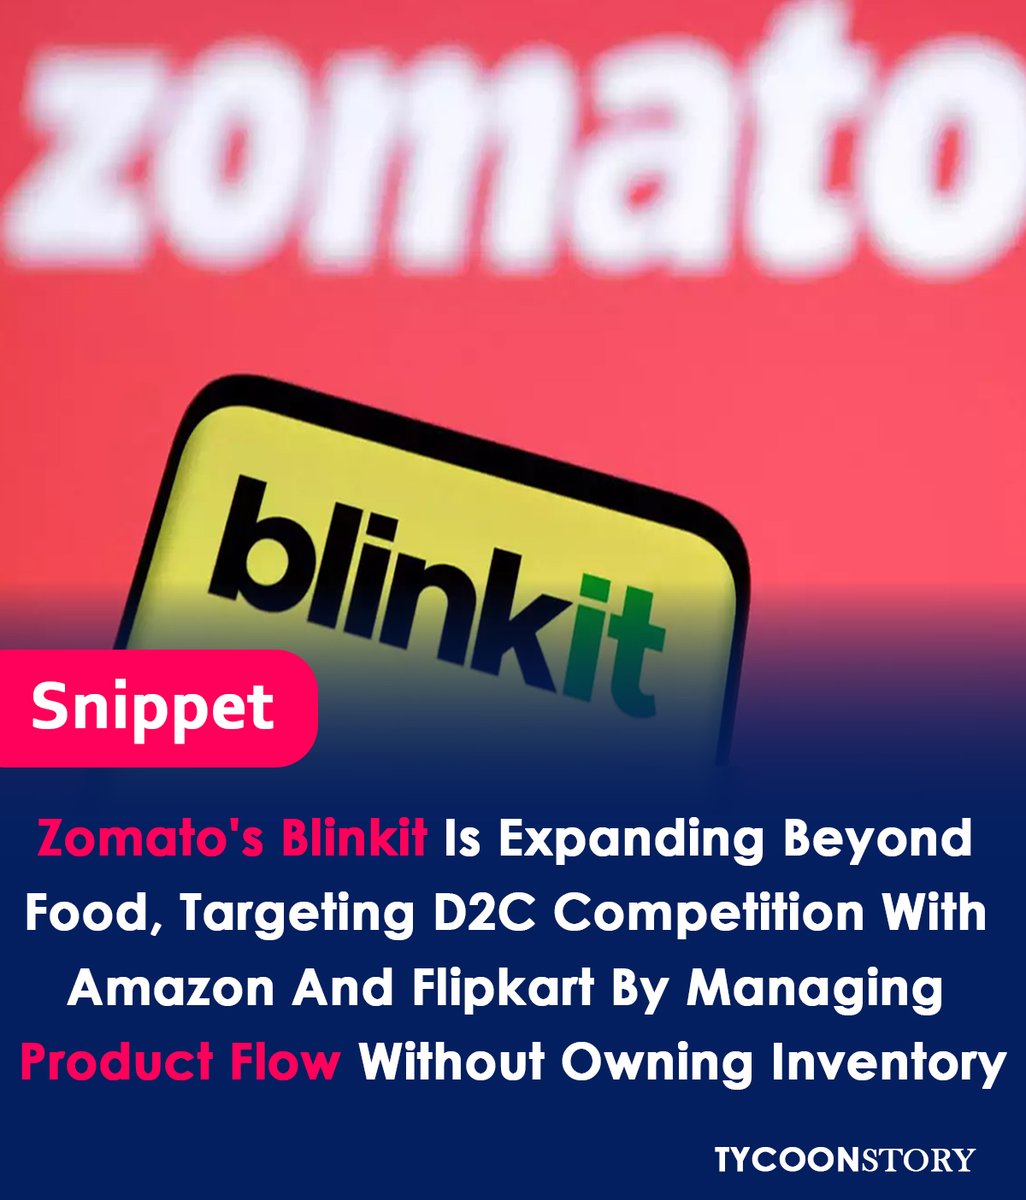 Zomato expands Blinkit beyond groceries, targeting D2C brands and delivery efficiency.
#instantdelivery #onlineretail #ecommercegrowth #businessstrategy #competitions #consumertrends #d2cbrands #inventorymanagement #logisticsoptimization #deliveryservice @letsblinkit  @zomato